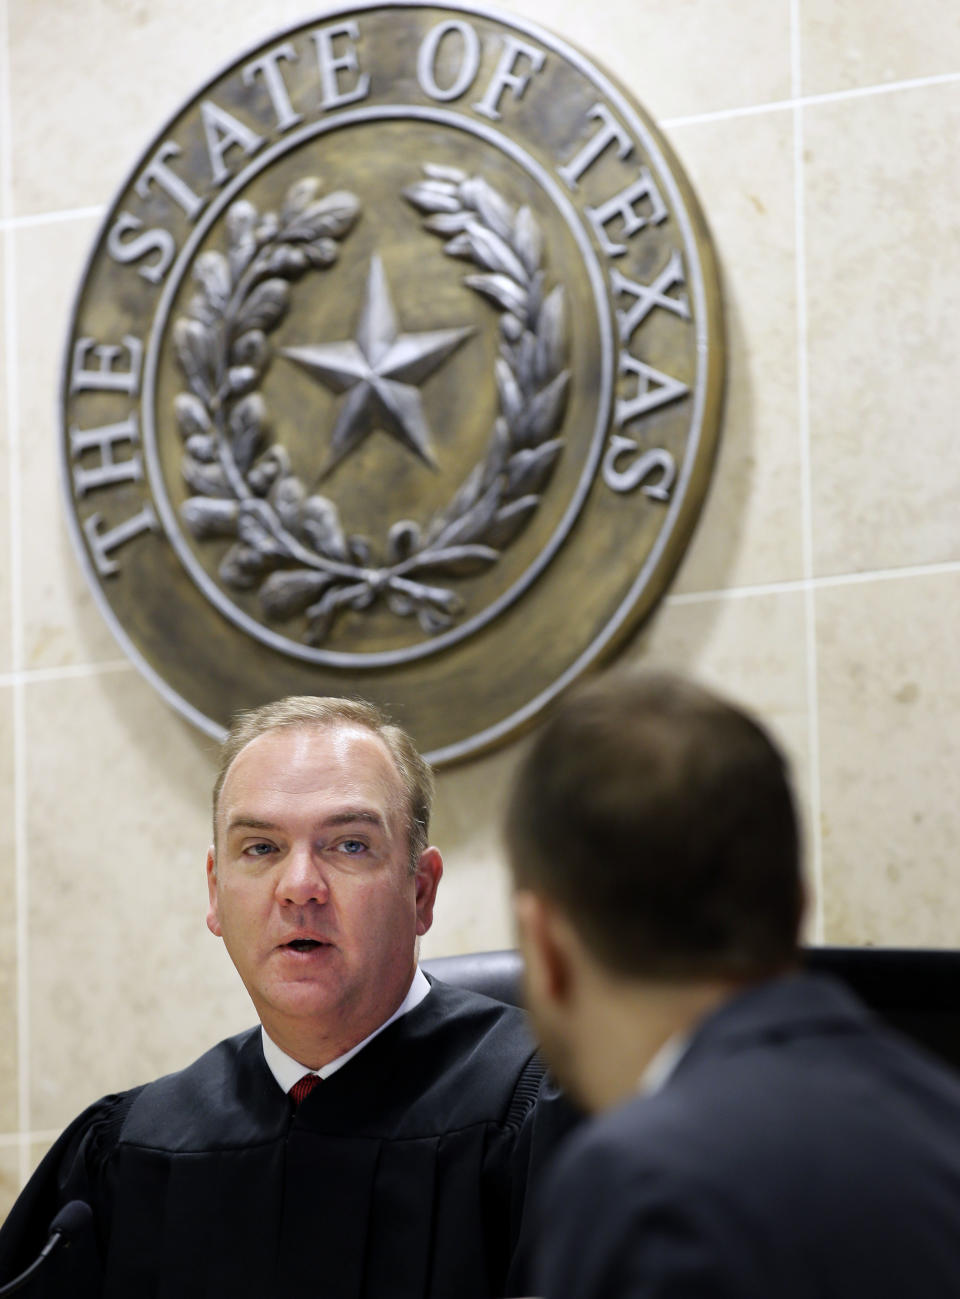 In this Thursday, Dec. 22, 2016 photo, Judge John Roach Jr., left, speaks to a lawyer during a hearing in McKinney, Texas. Rather than requiring veterans to travel to court appearances, Roach Jr.’s court travels to them. The traveling court serves veterans in five counties near Dallas who don’t have transportation. Veterans say the opportunity is life-changing. (AP Photo/LM Otero)